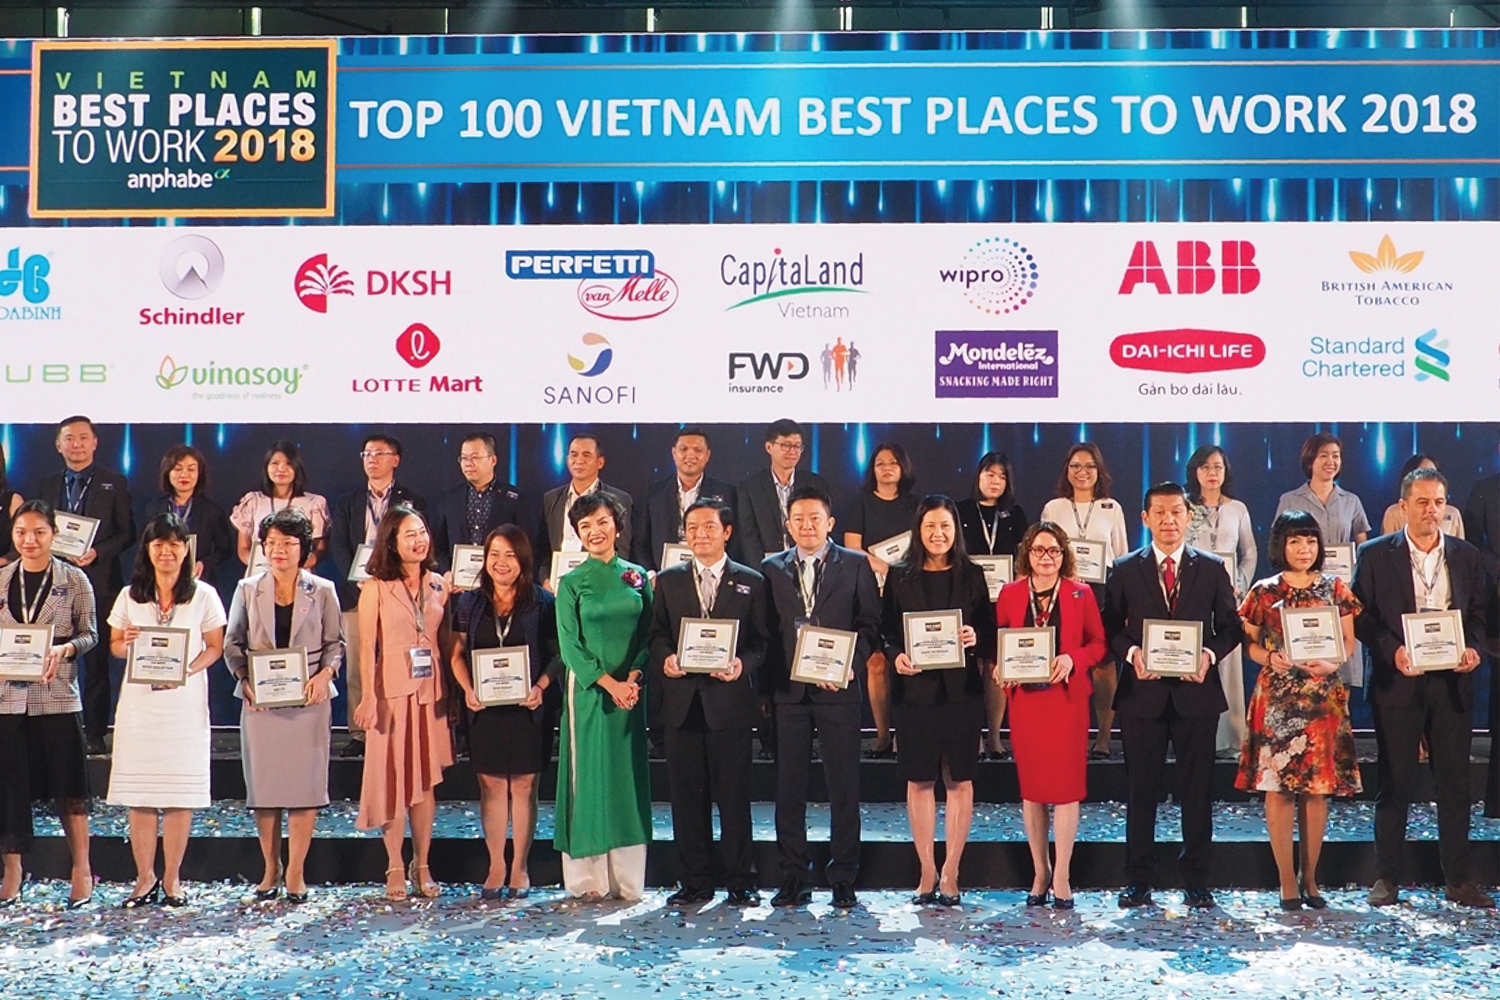 DKSH ranked among best places to work in Vietnam